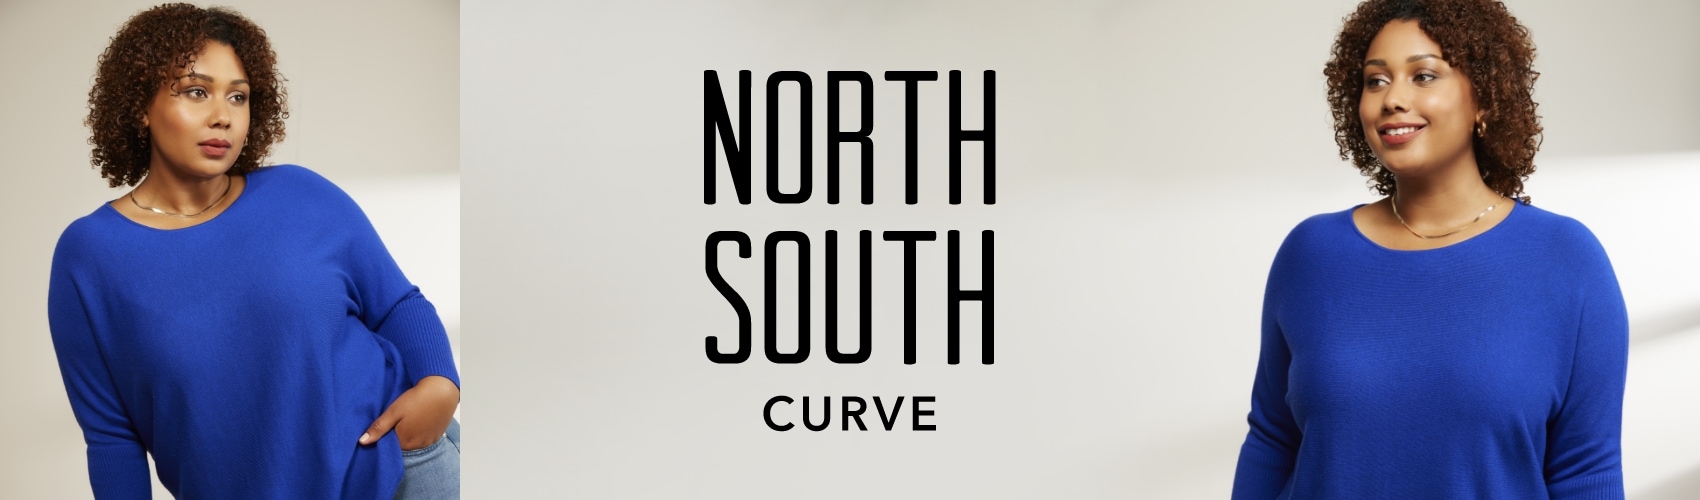 North South Curve